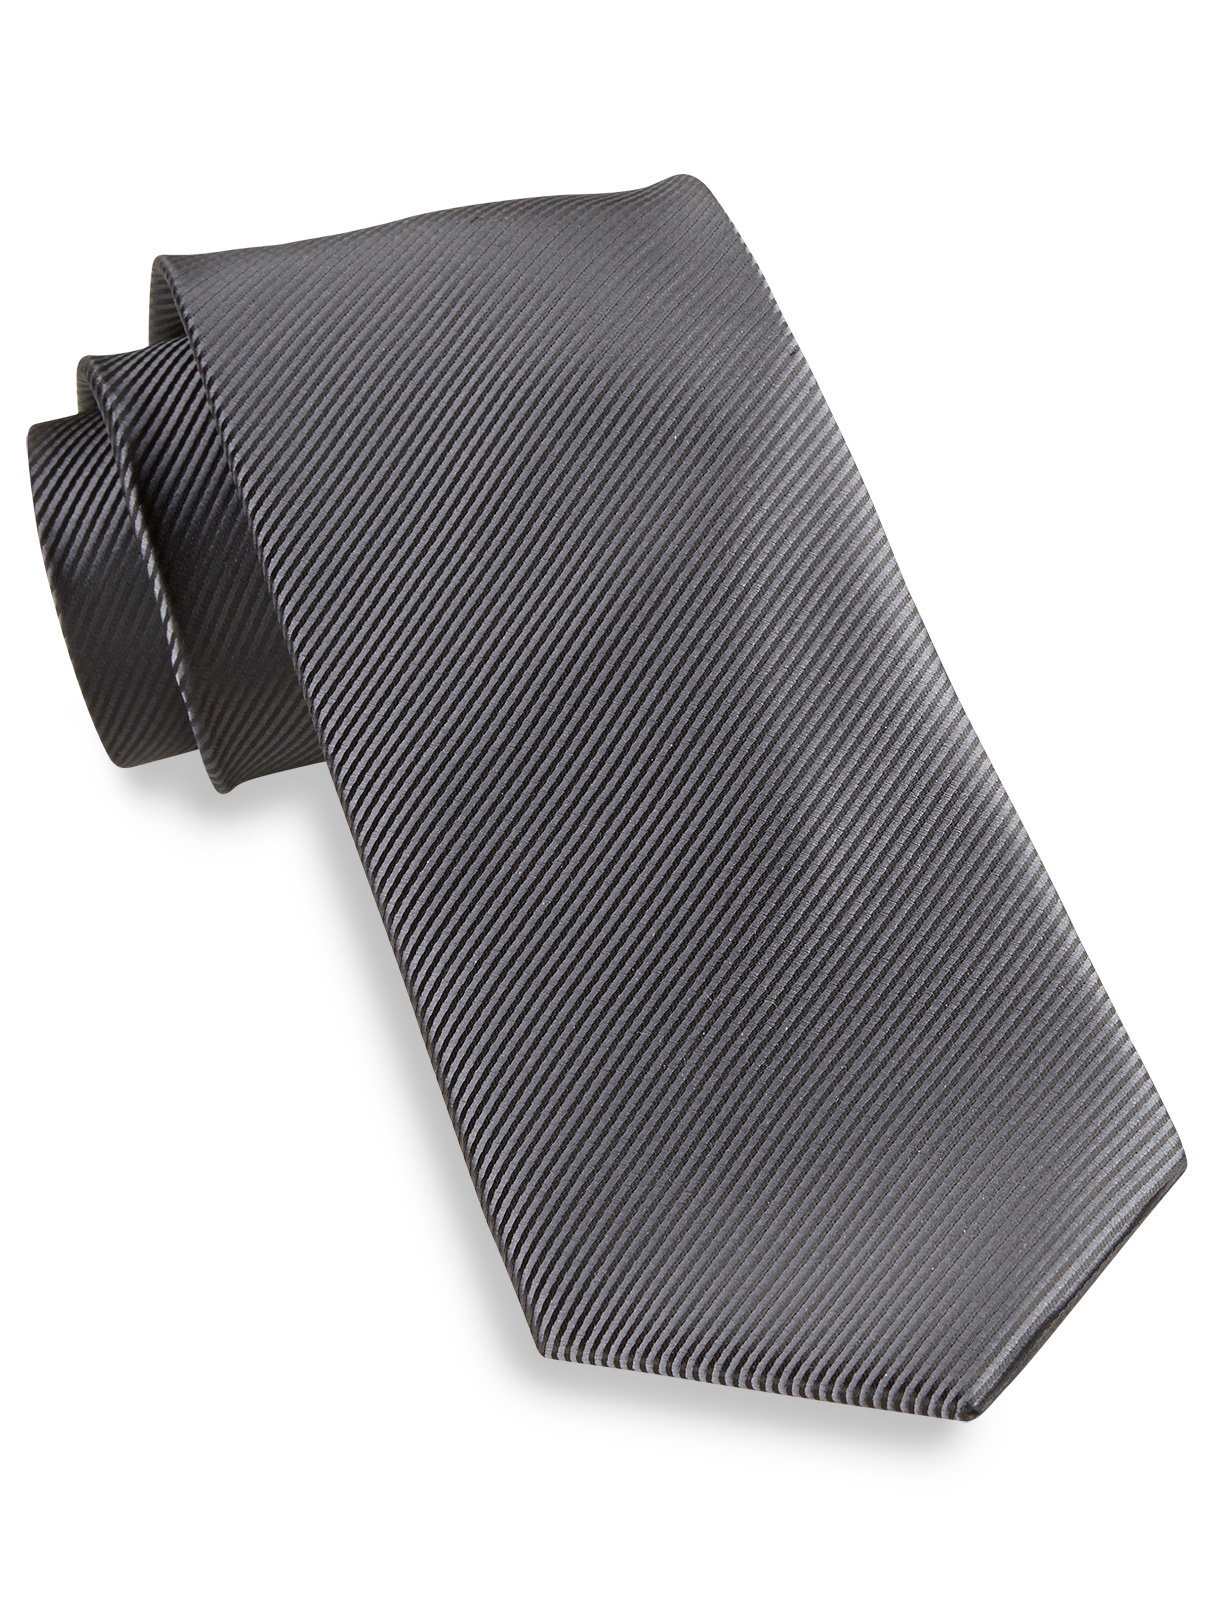 Synrgy Men's Big and Tall Textured Solid Stain-Resistant Tie